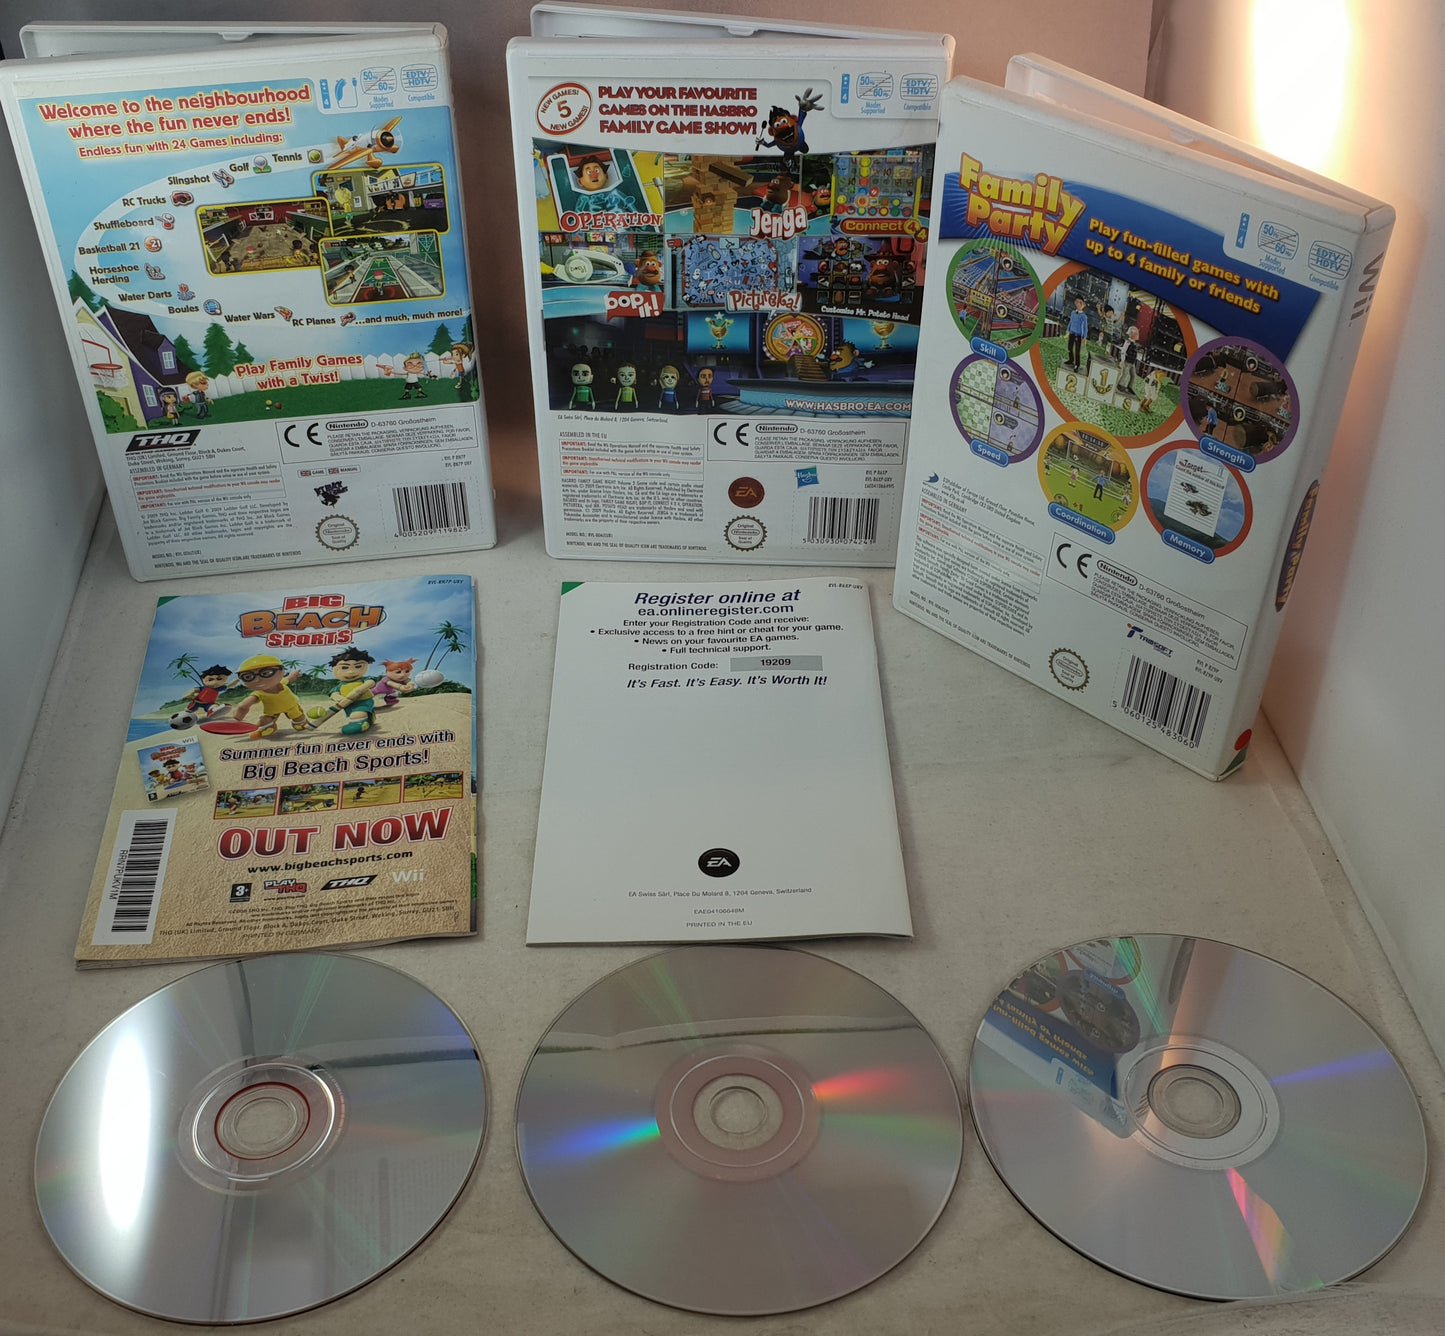 Family  Party, Family Game Night 2 & Big Family Games Nintendo Wii Game Bundle